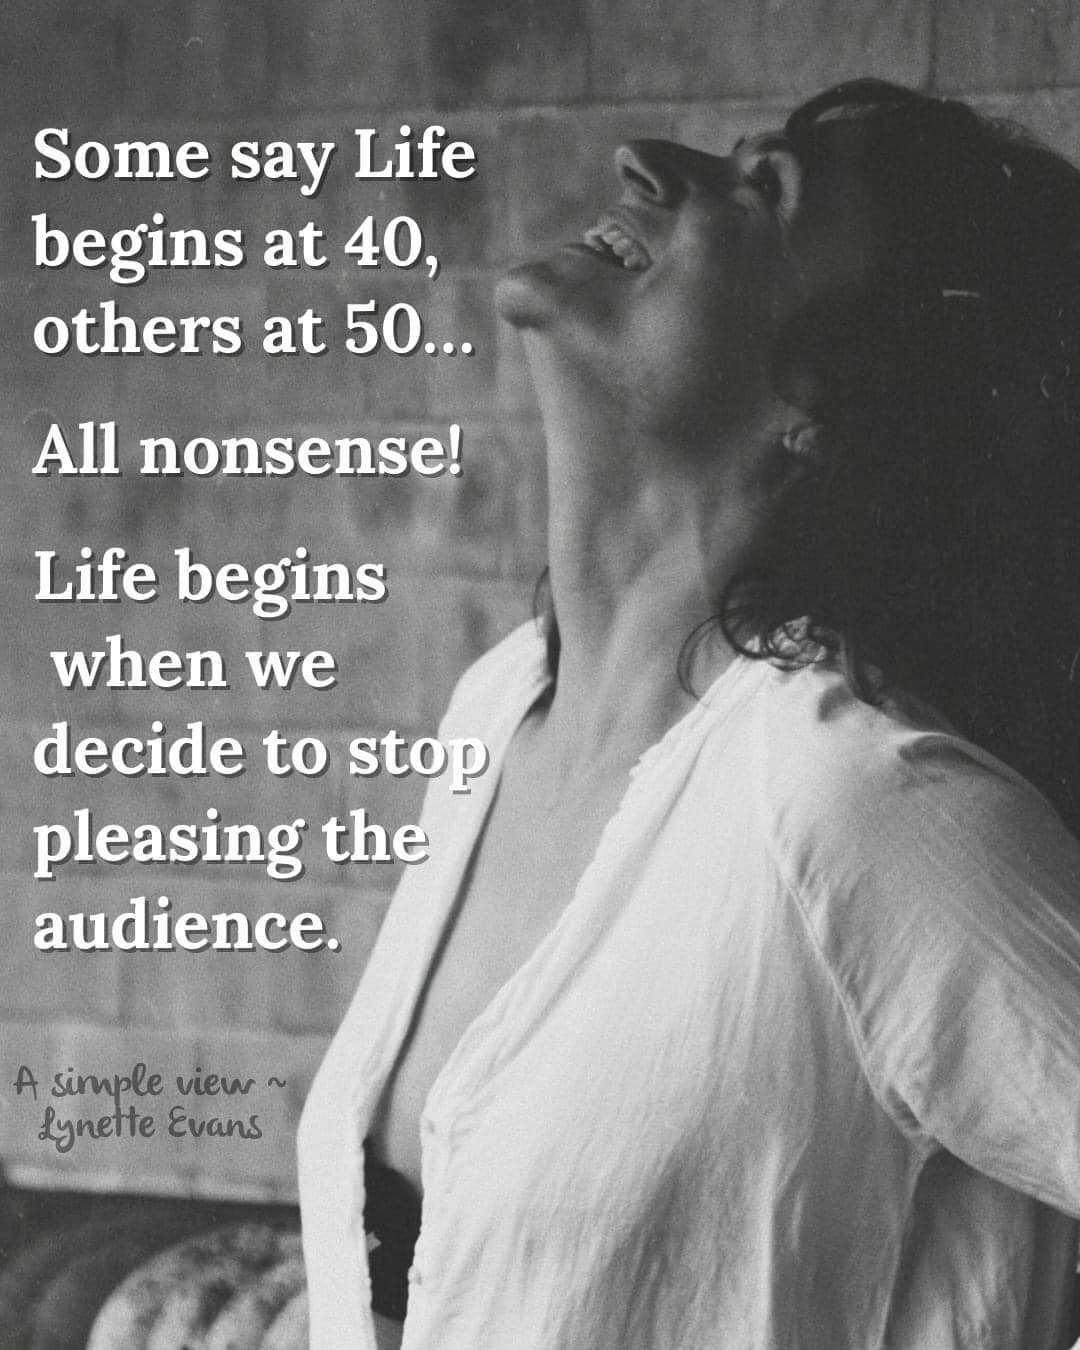 Some say life begins at 40 other at 50. All nonsense!  Life begins when we decide to stop pleasing the audience.